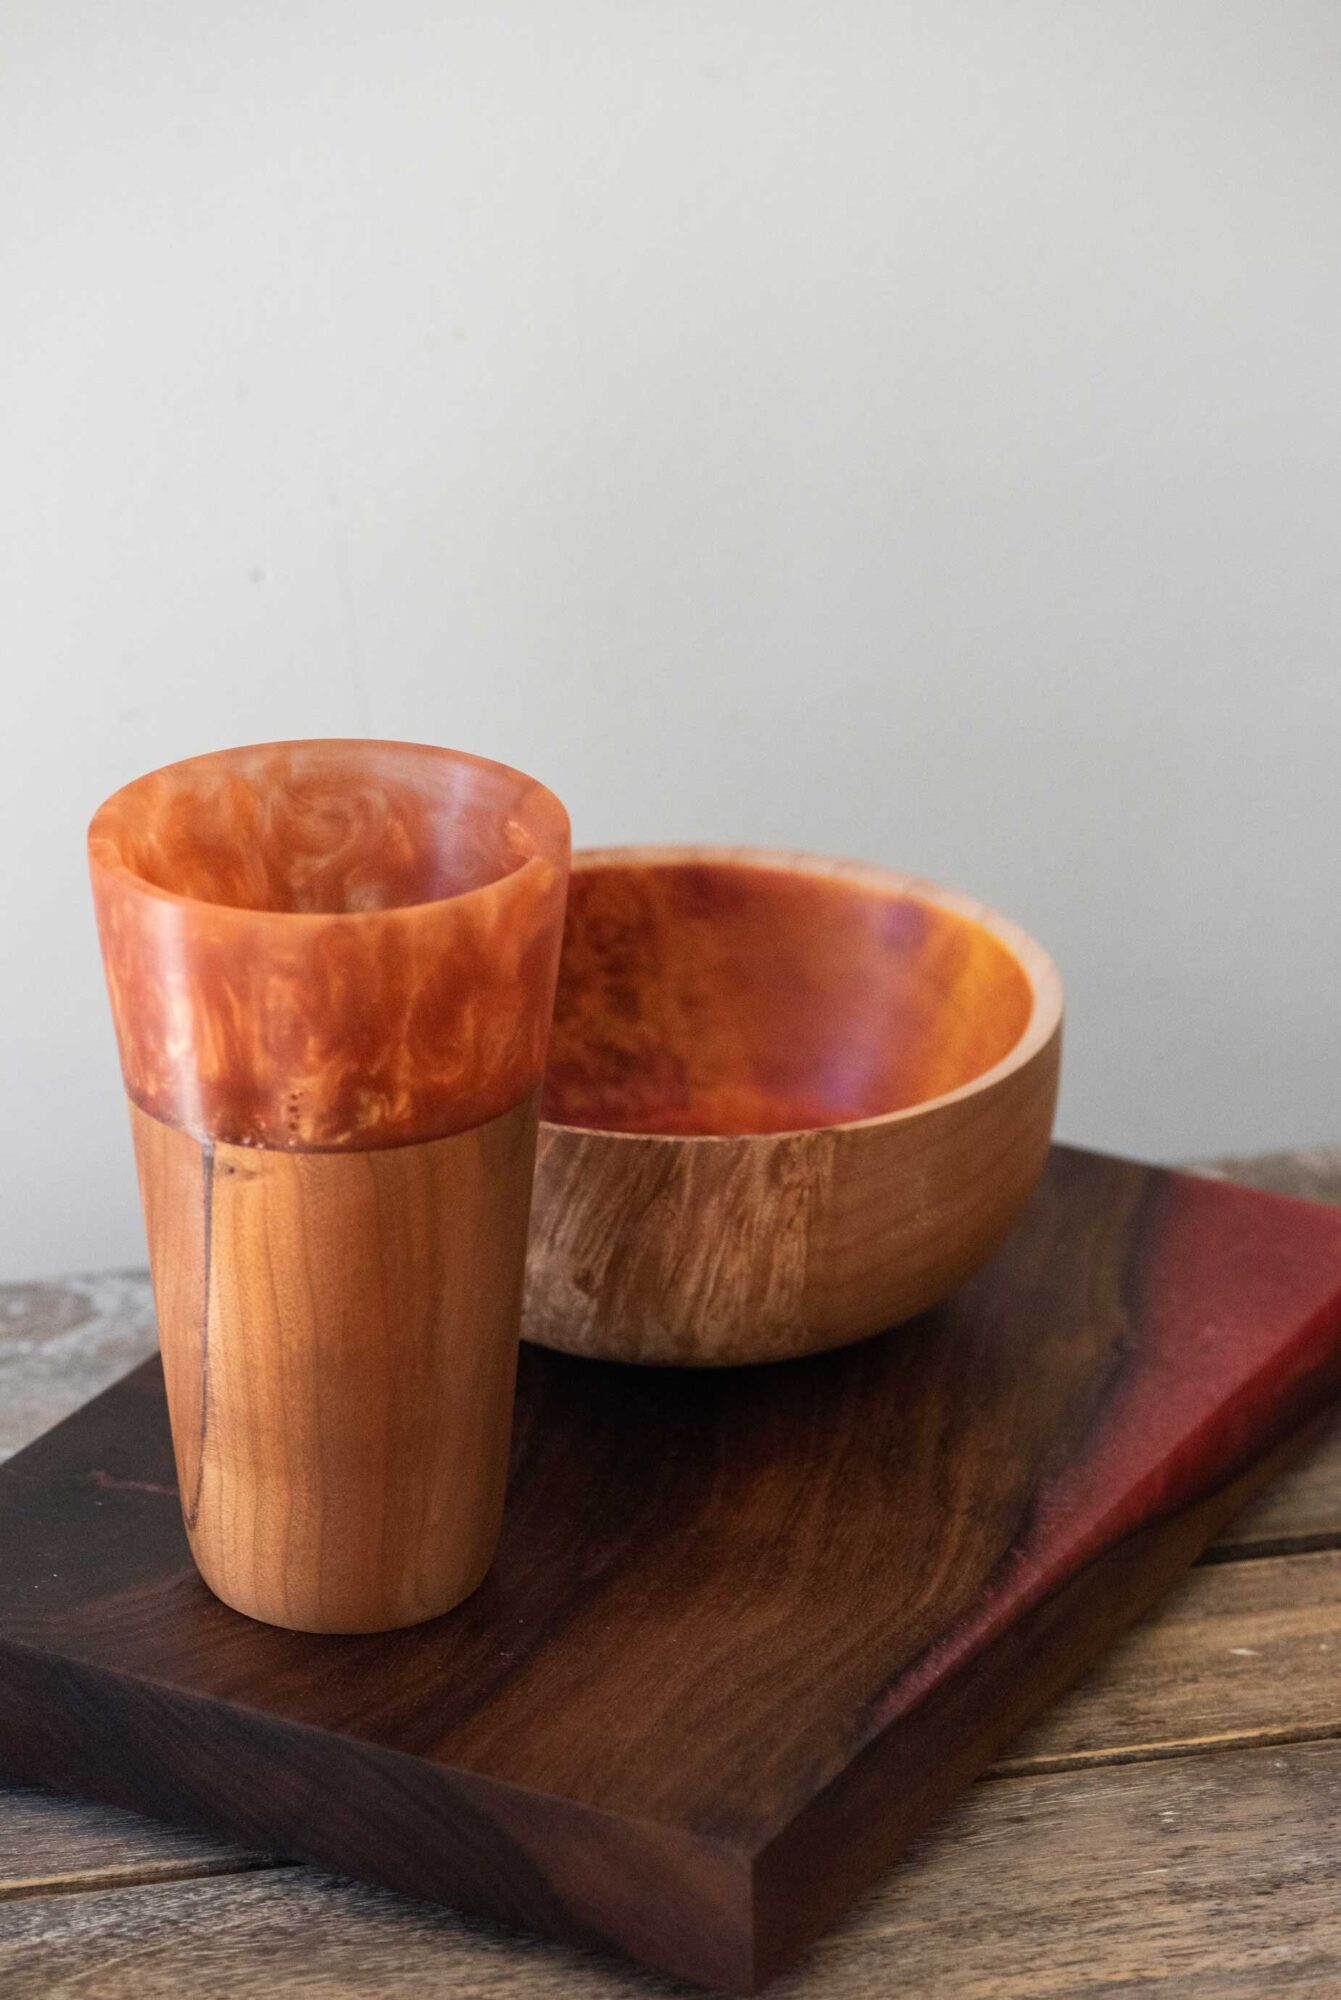  This cup, bowl, and board began as rough burl or “blanks”; Peggy’s artful hand turned them into masterpieces. 